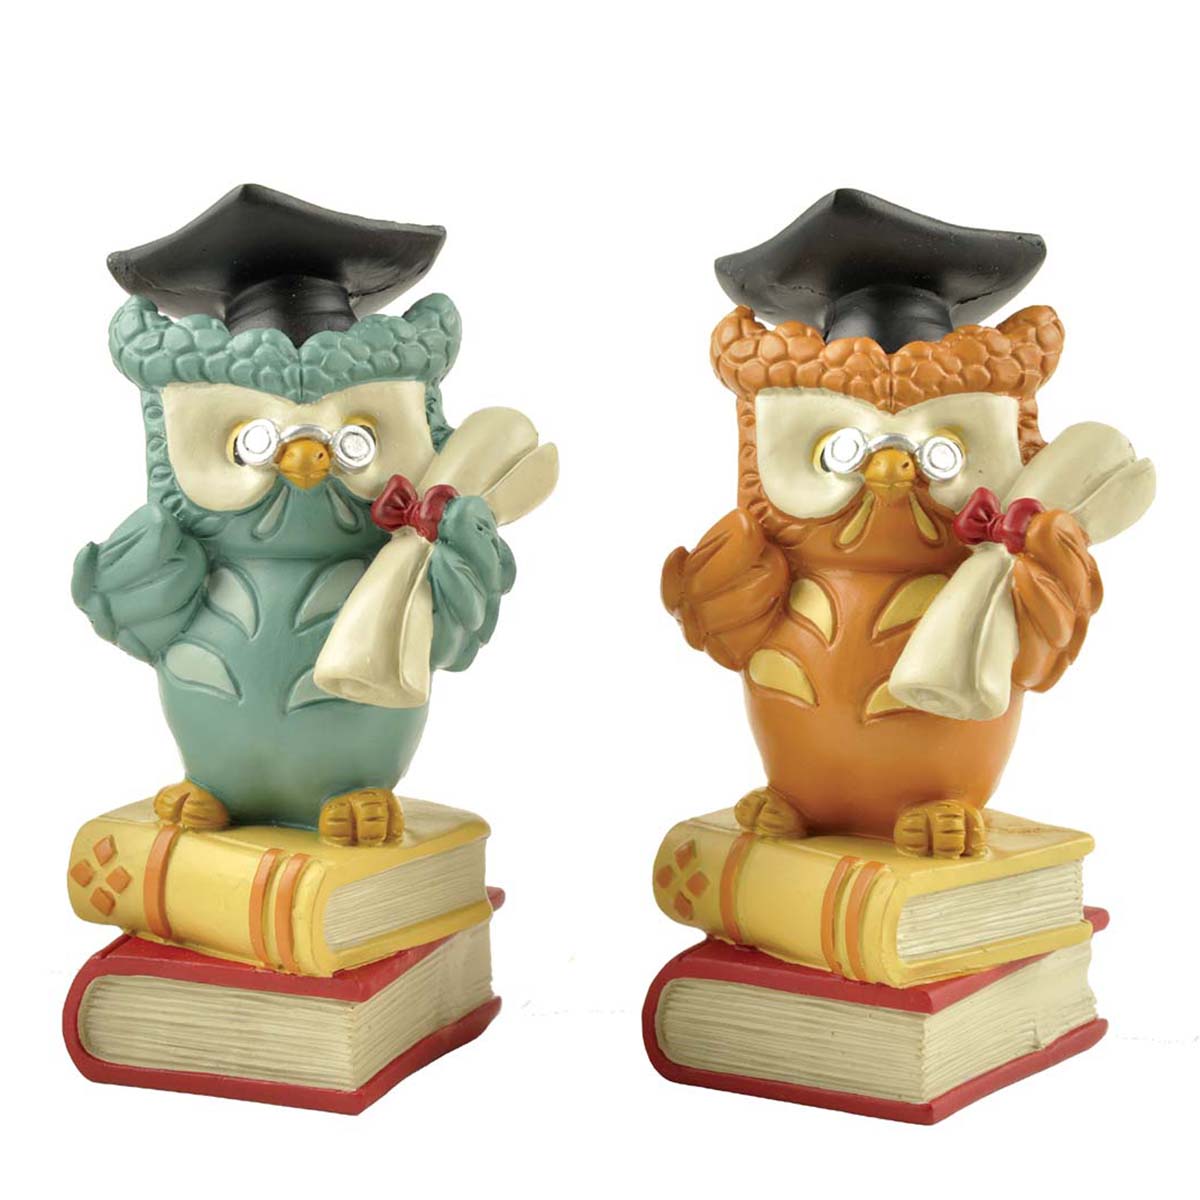 Ennas best price good graduation gifts from best factory-1